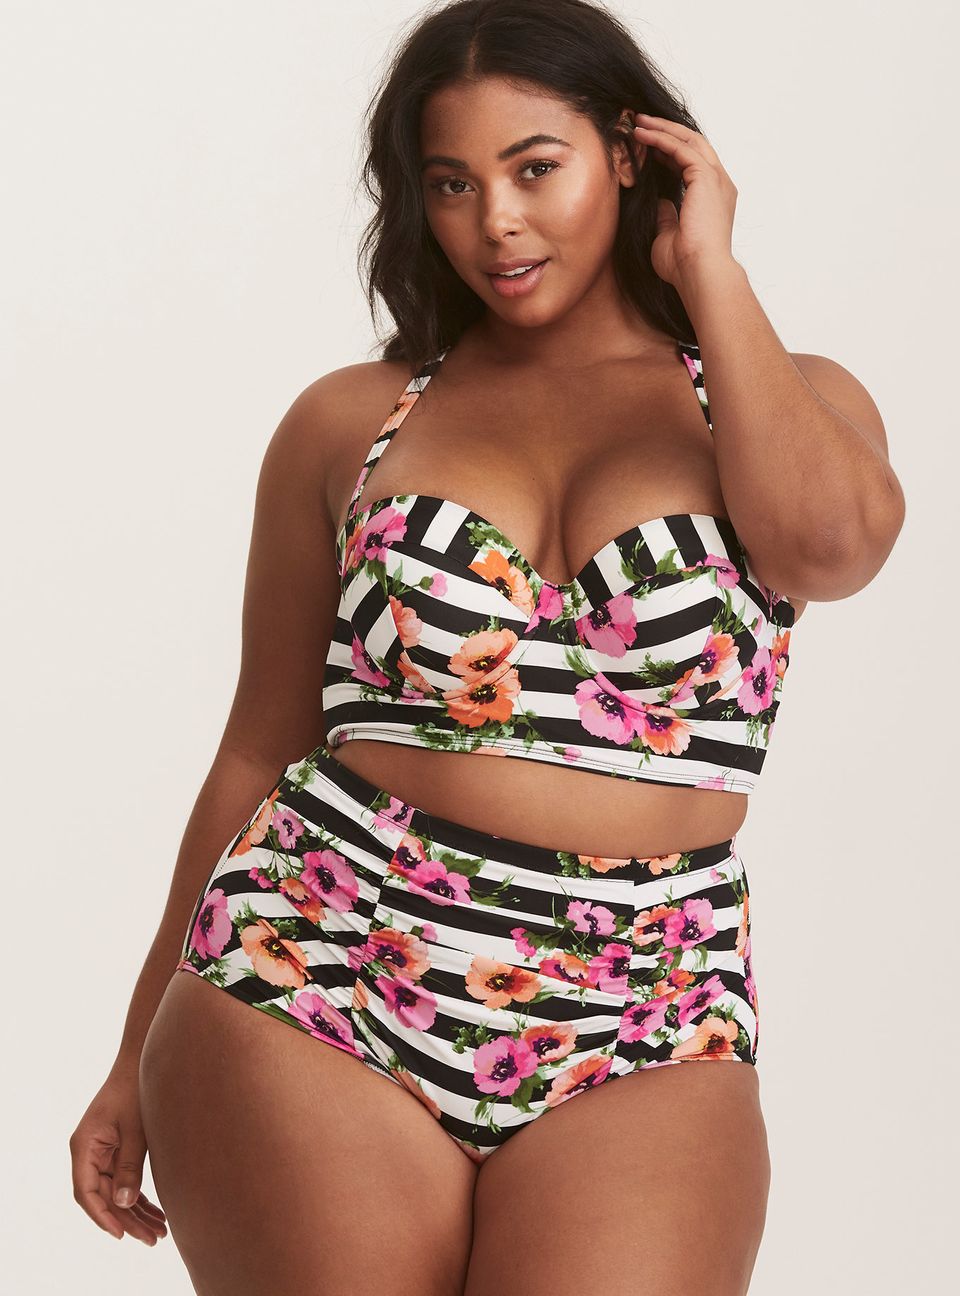 Plus-Size Underwire Swimsuits